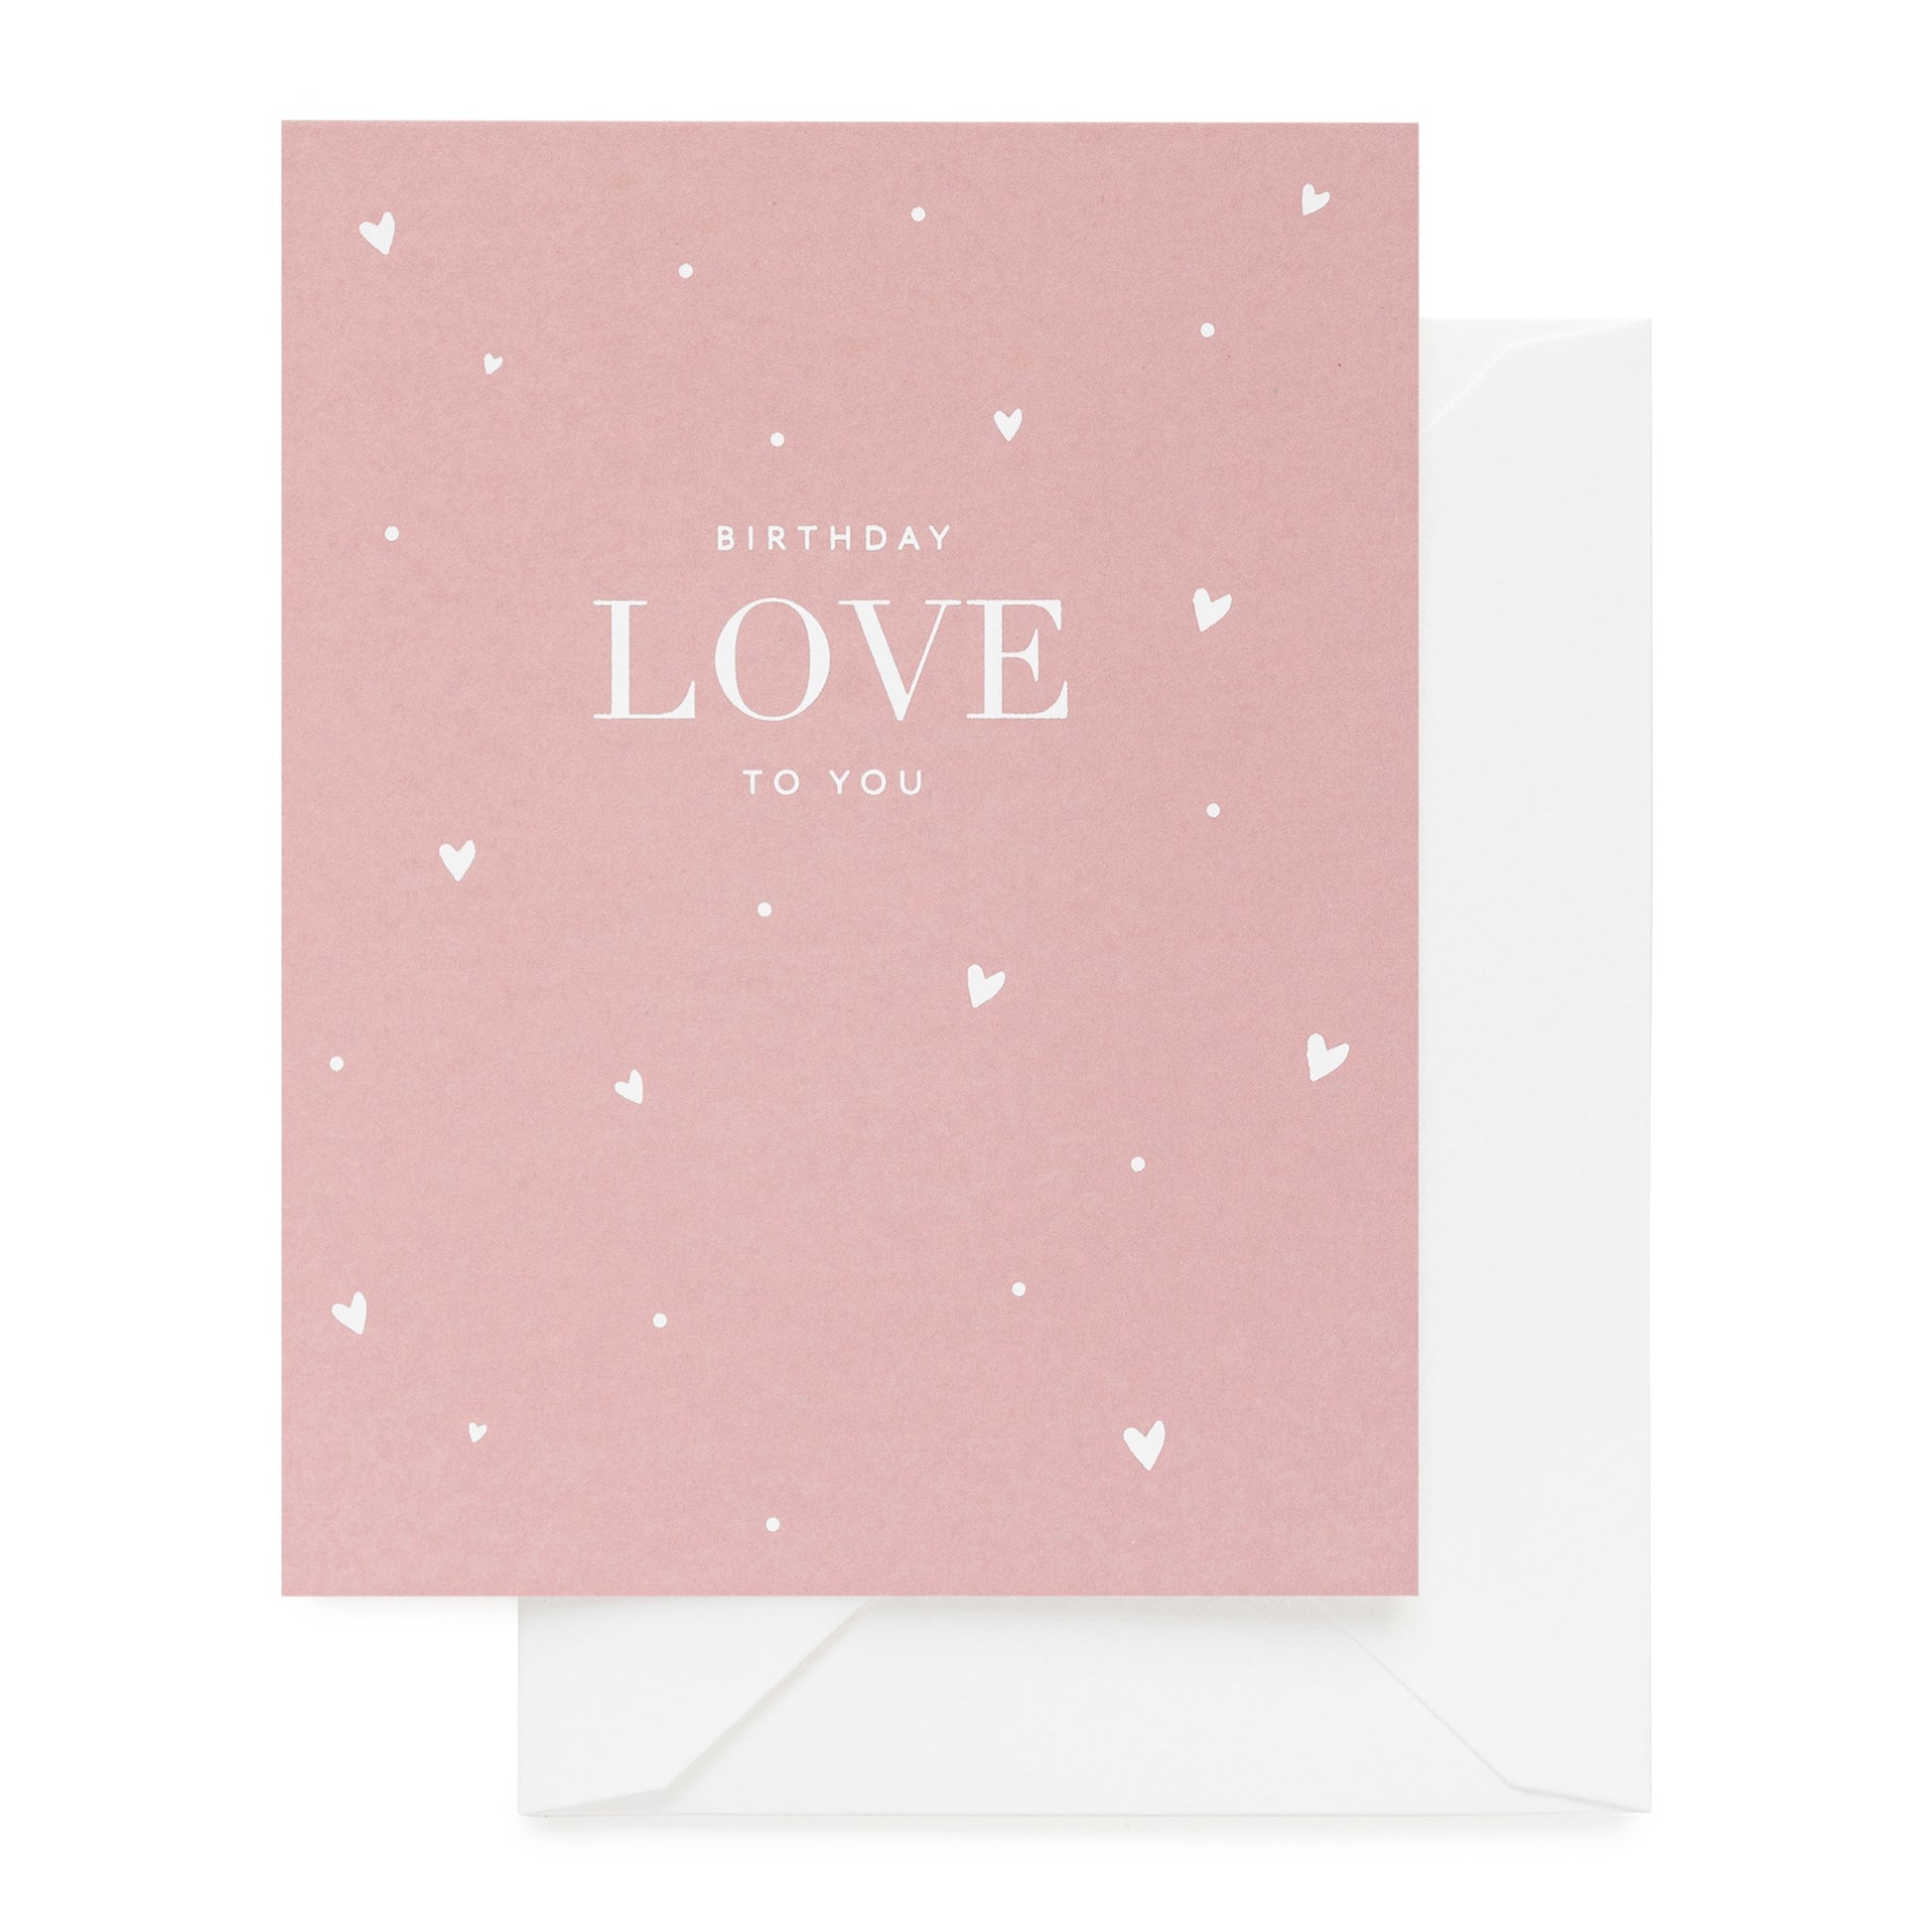 Dusty rose birthday card with white foil "Birthday Love To You"